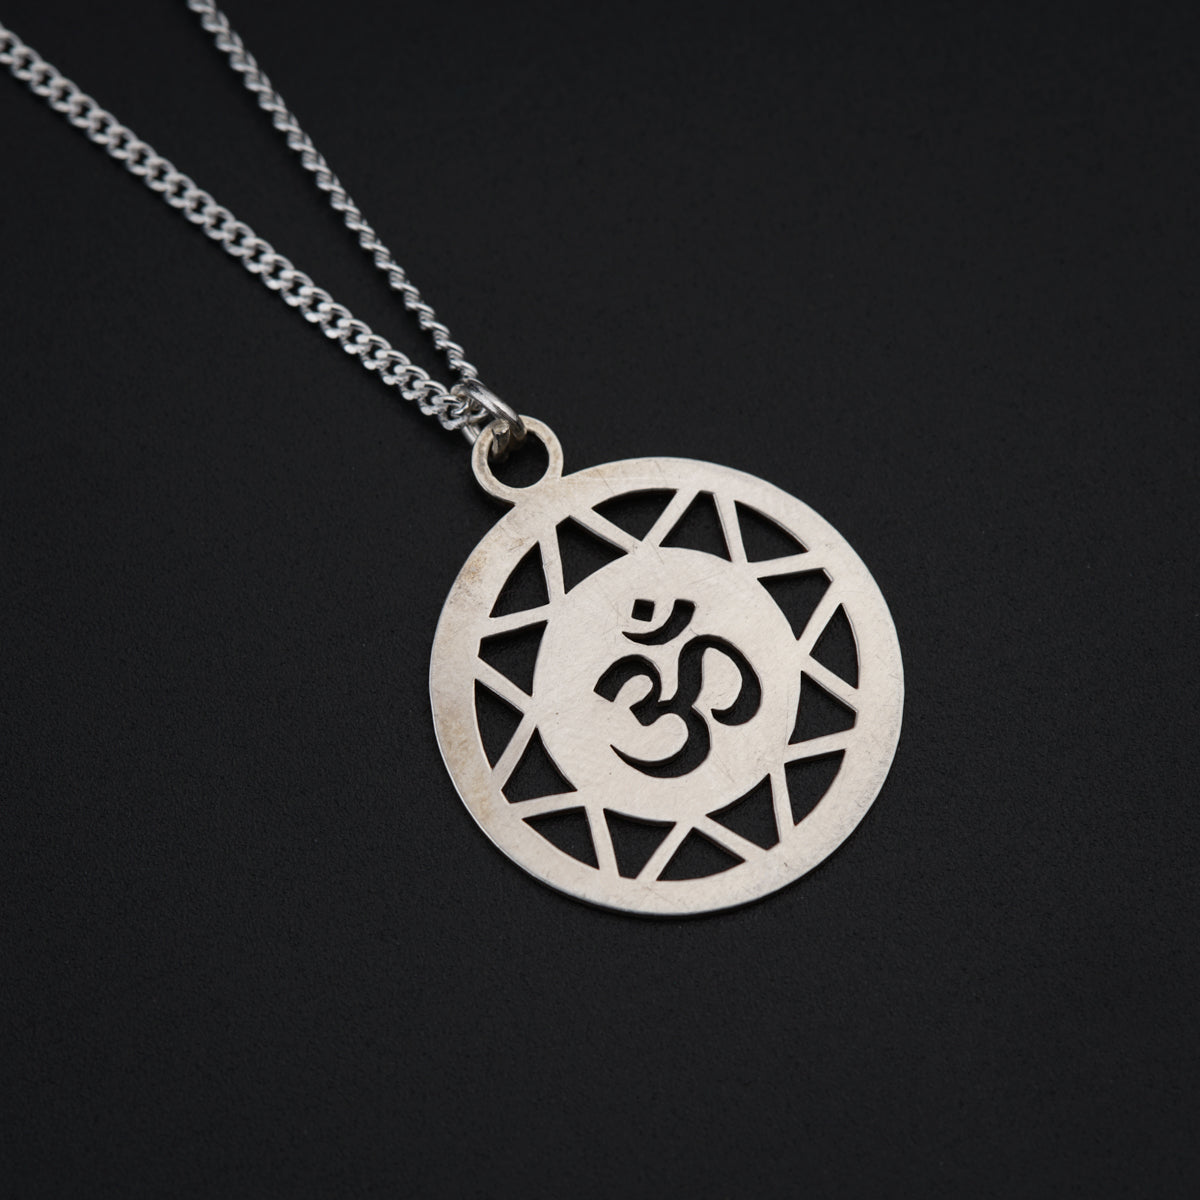 a silver necklace with a symbol on it